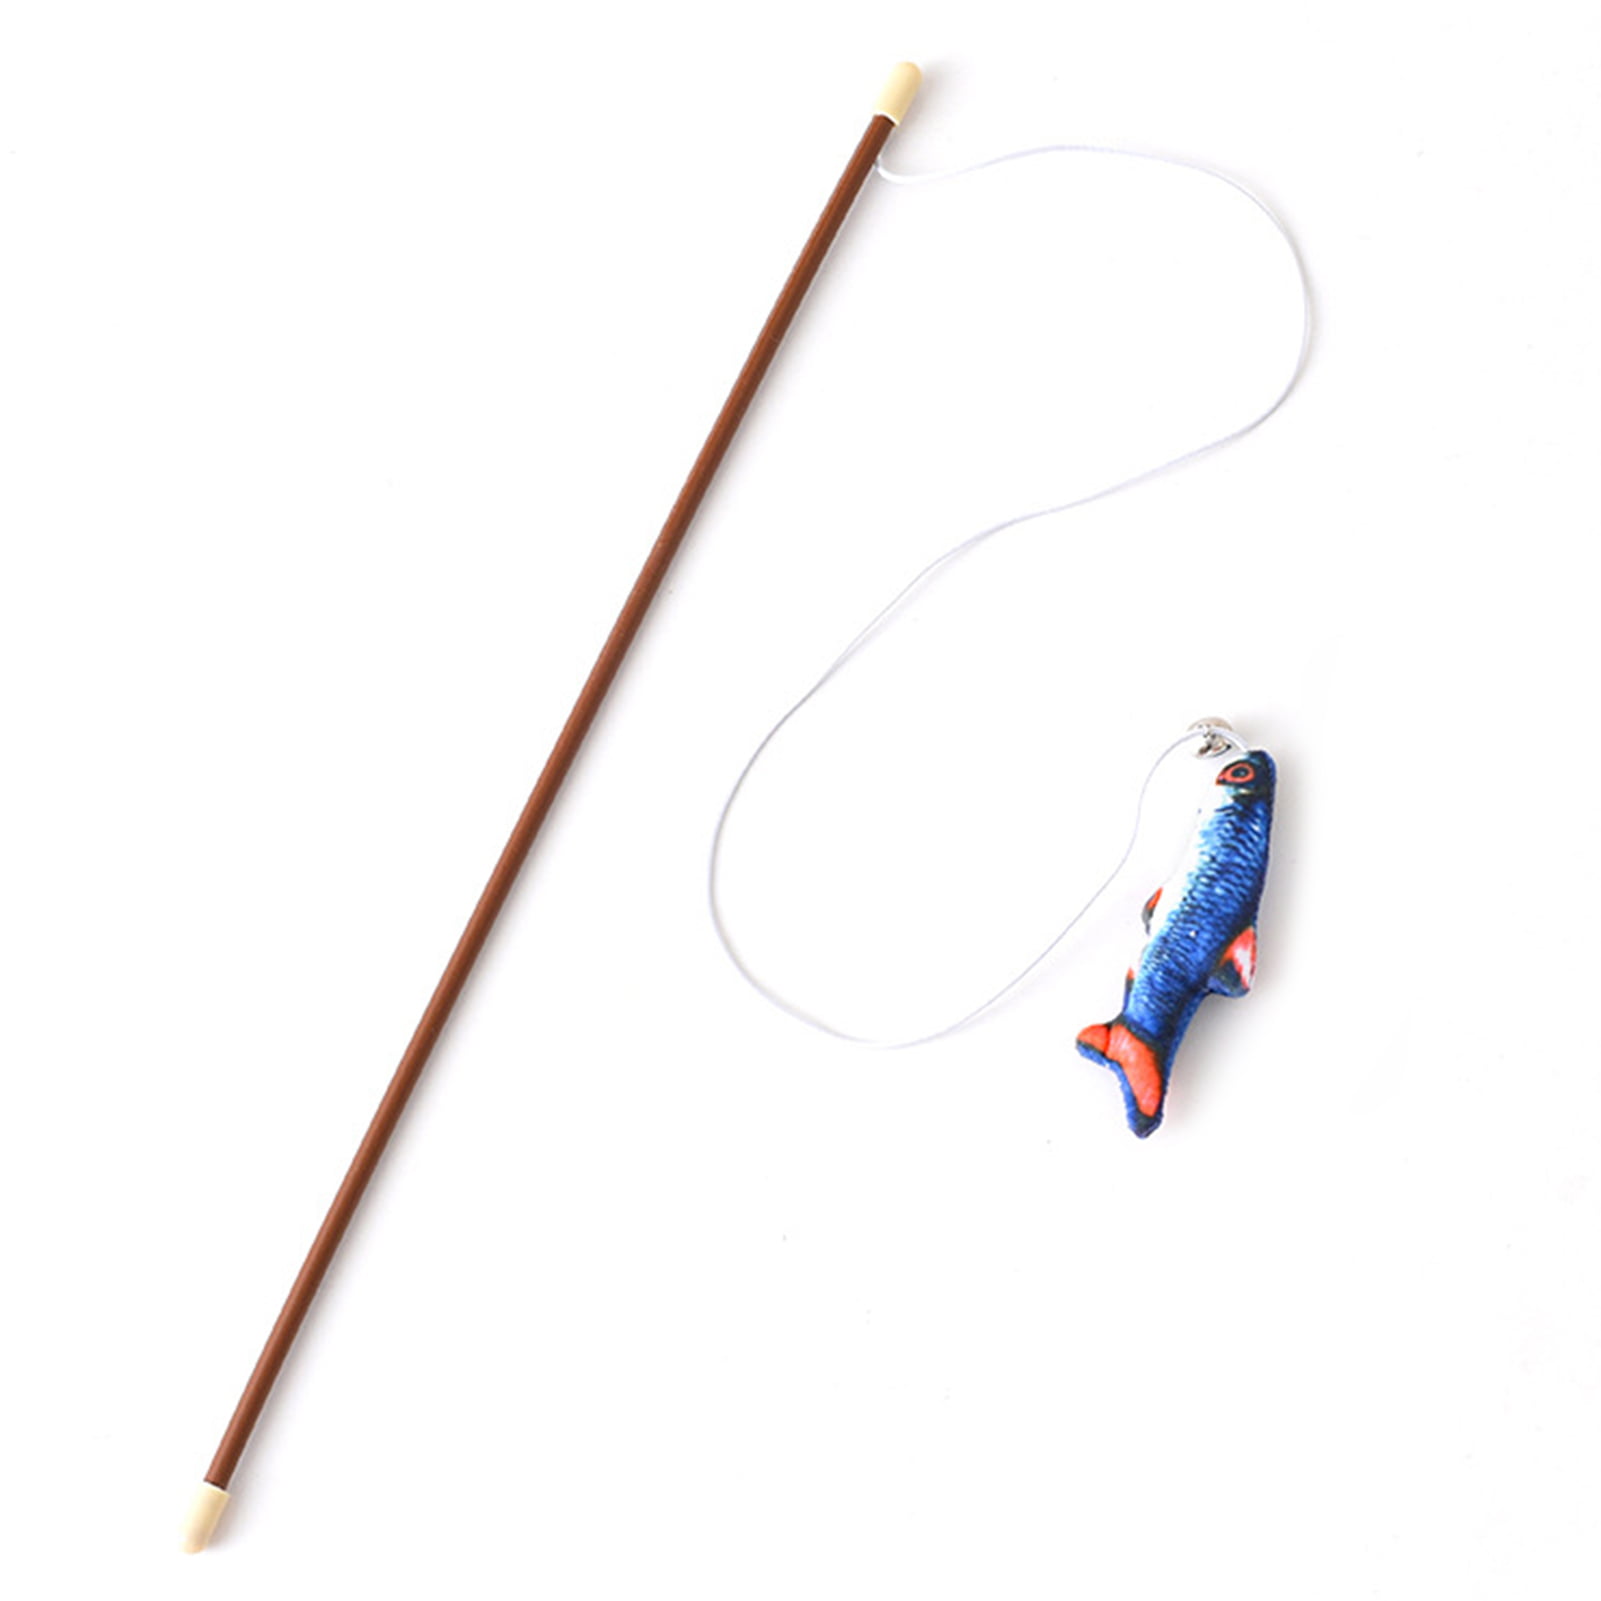 Realyc Cat Stick Toy Resistant to Bite Stress Relief Long Fishing